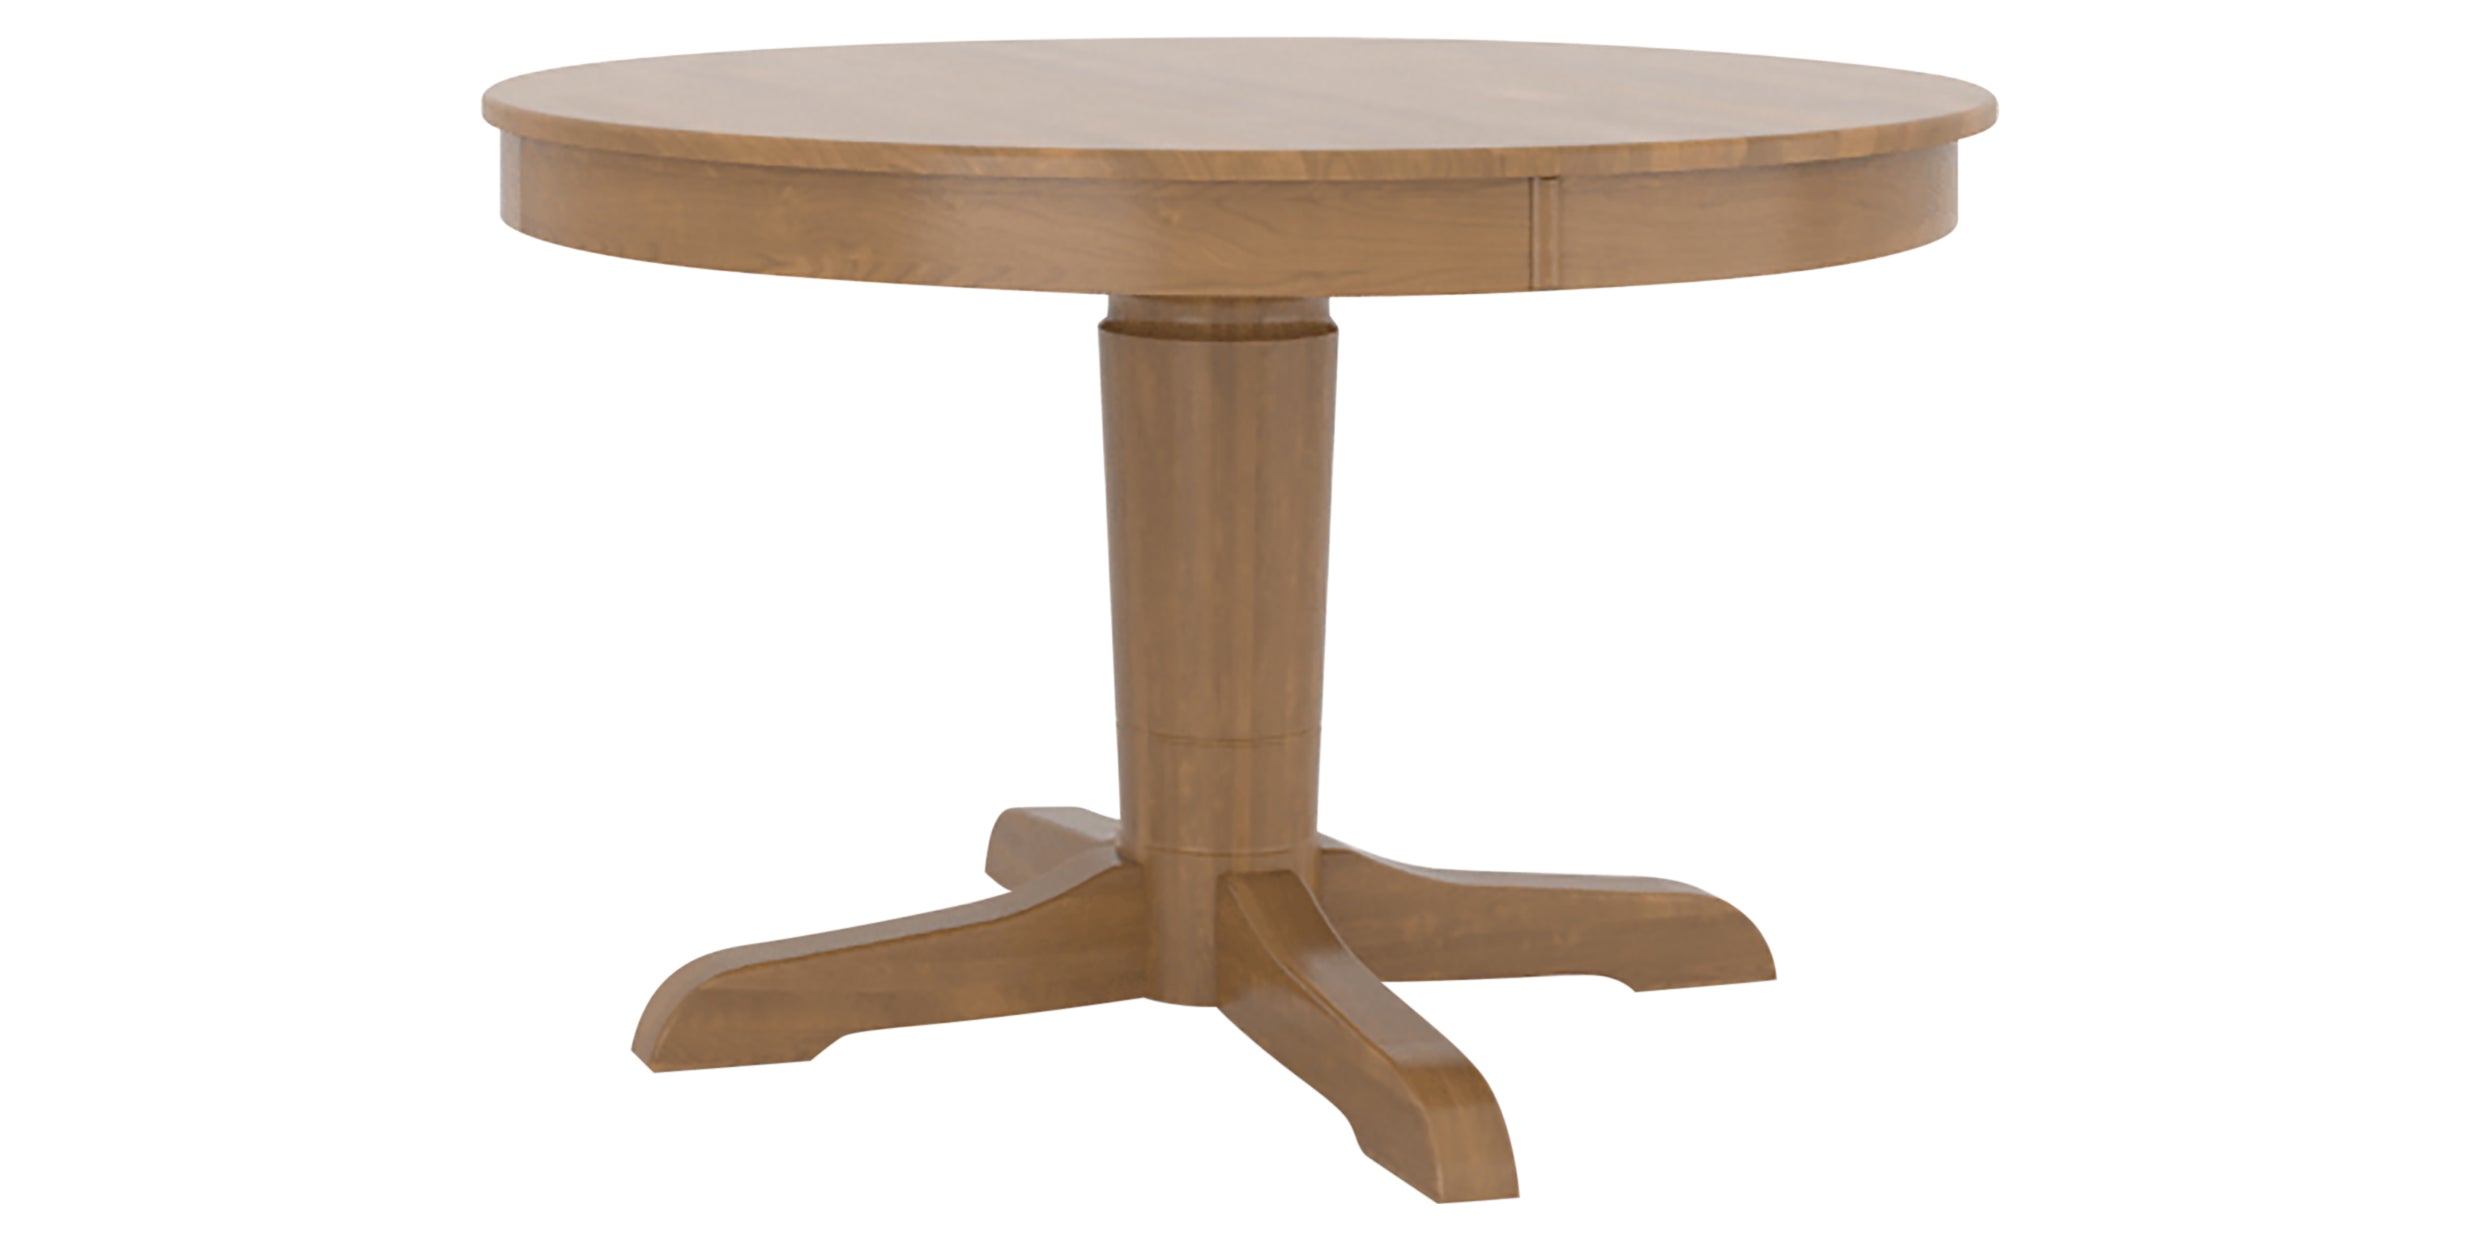 Honey Washed | Canadel Core Dining Table 4848 with YY Base | Valley Ridge Furniture